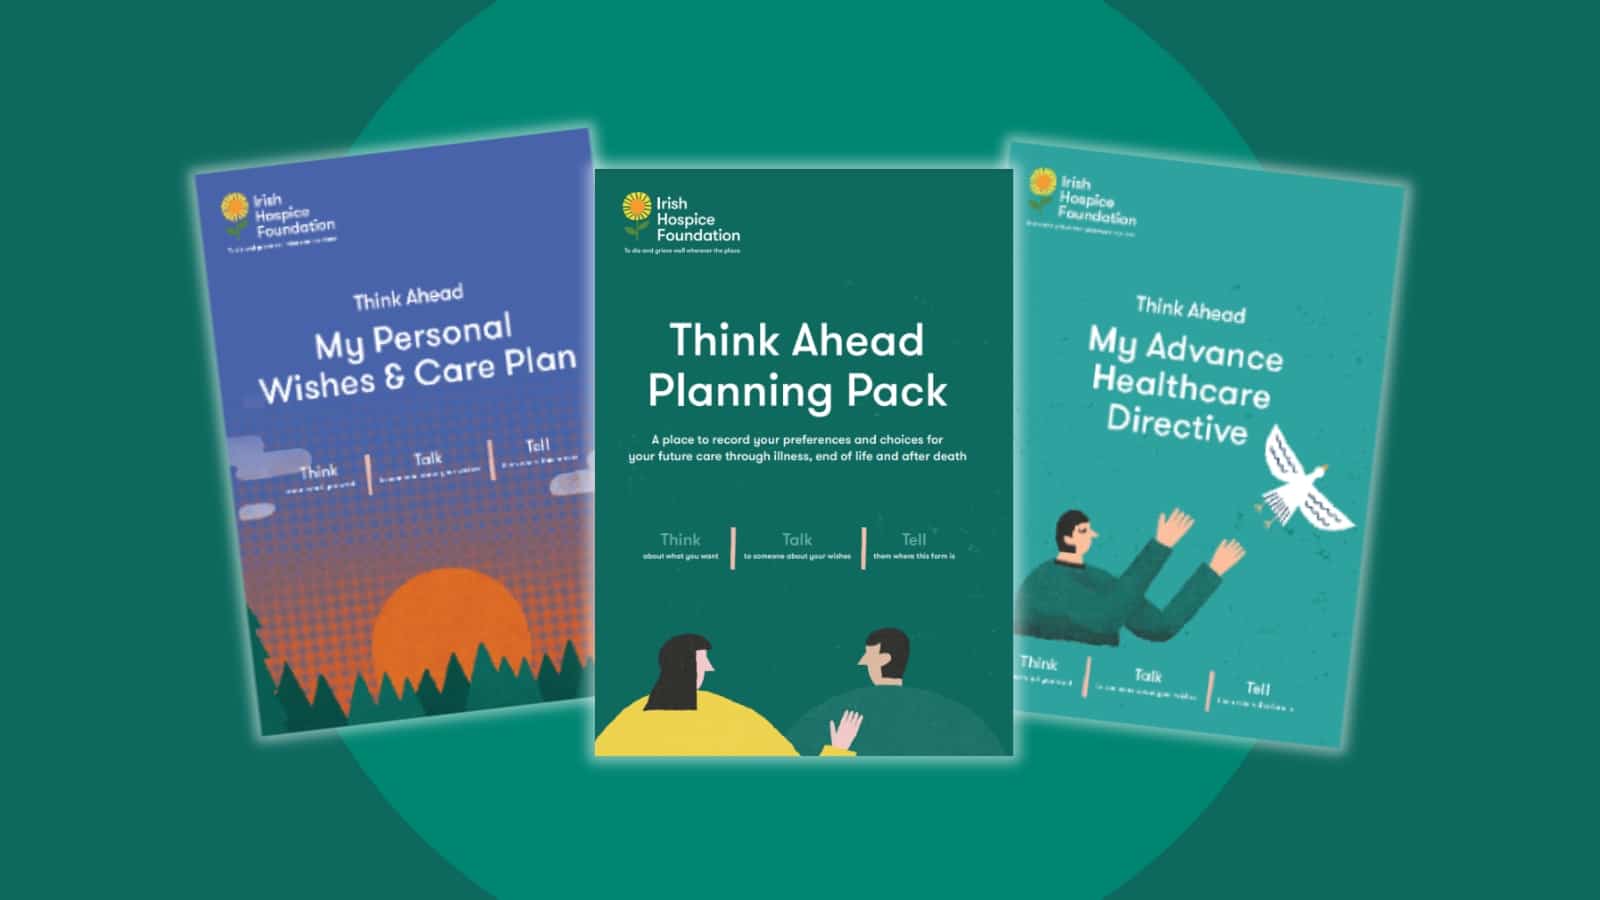 An image of the Think Ahead Planning Pack.